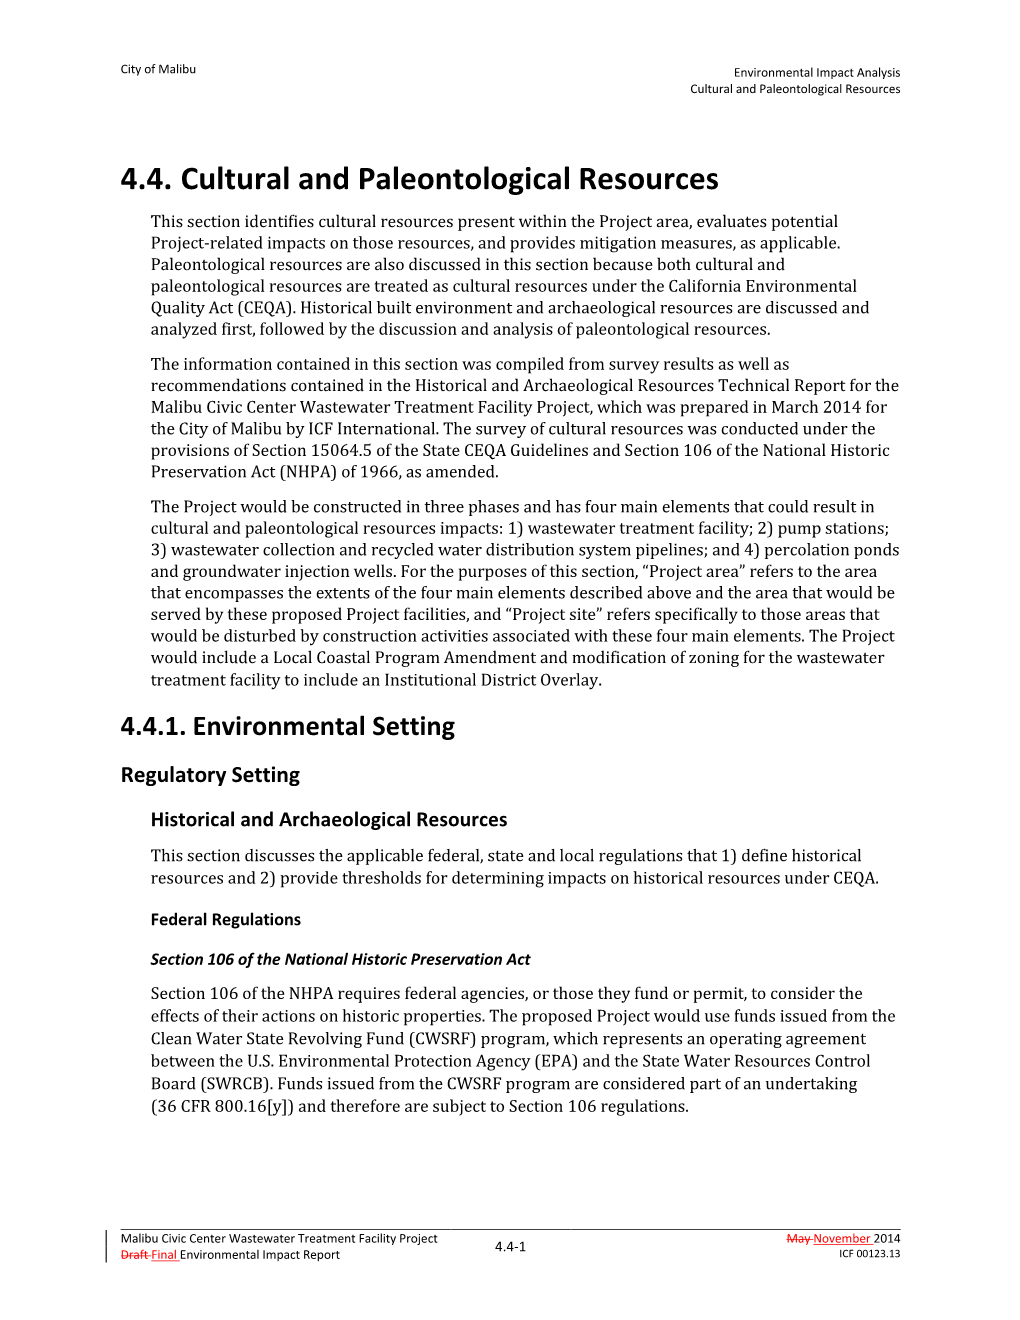 4.4. Cultural and Paleontological Resources